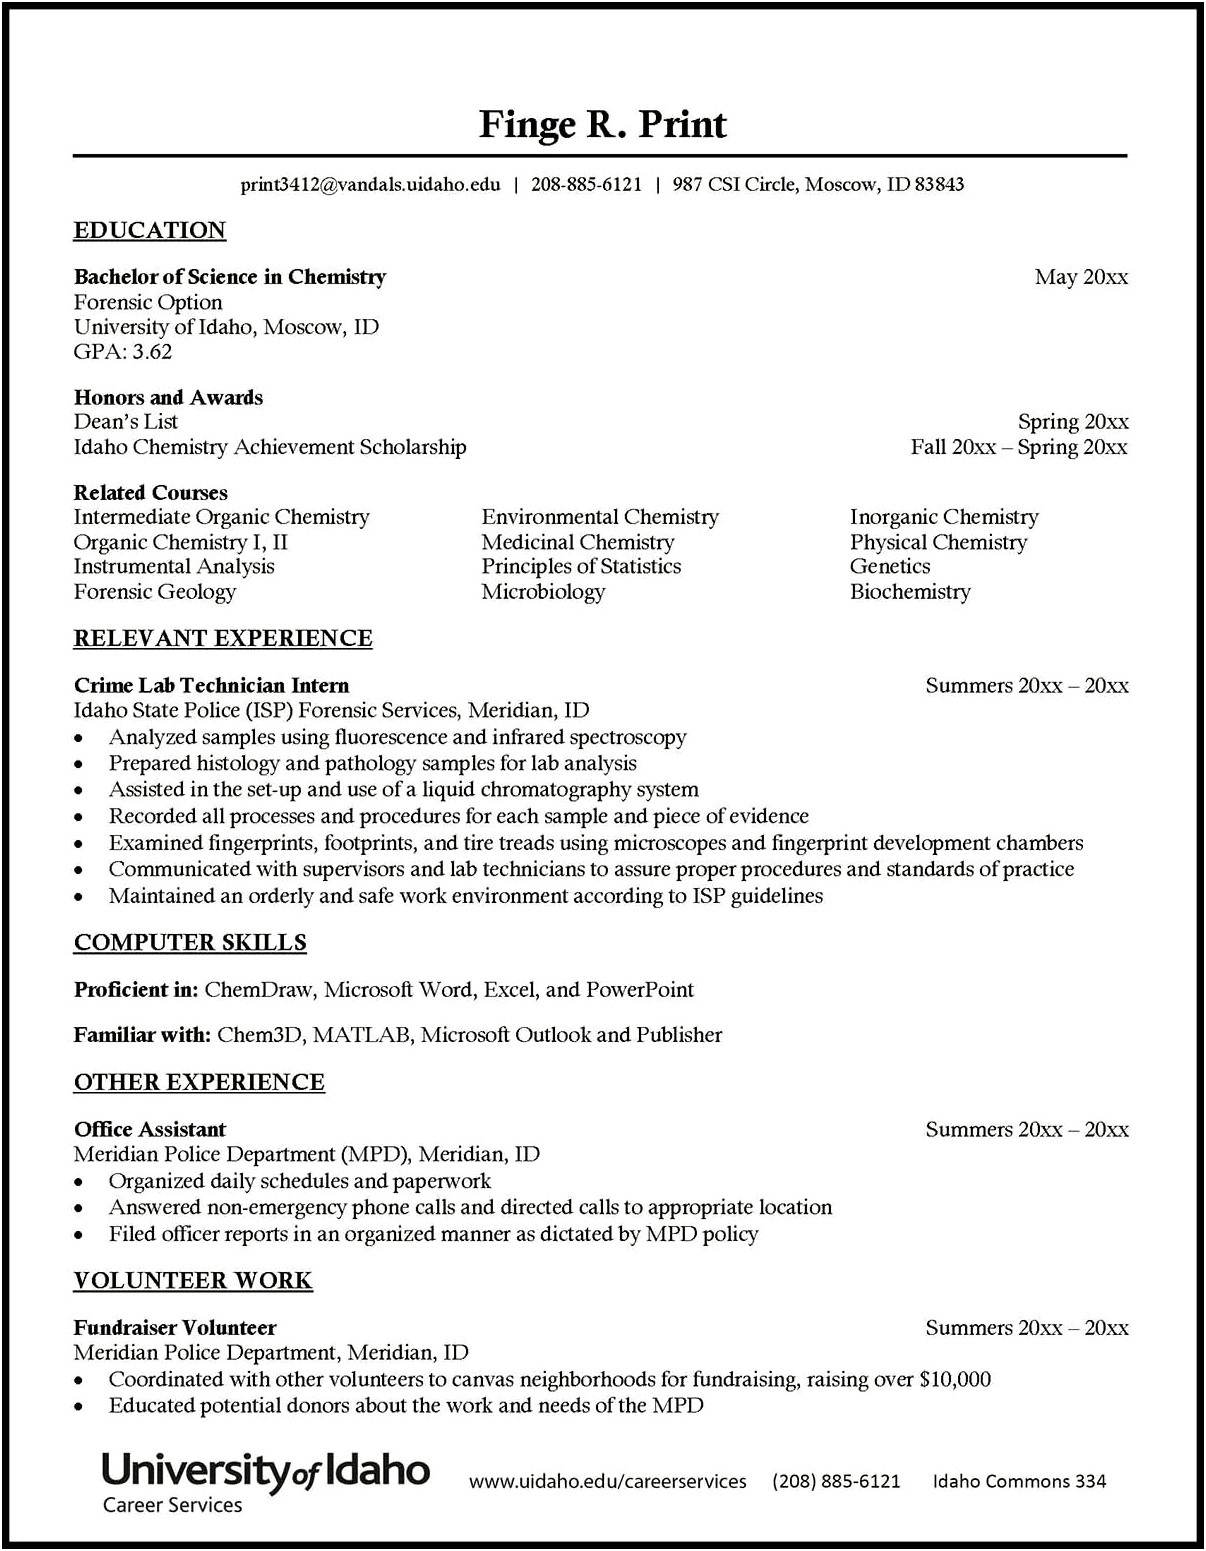 College Resumes With Scholarships Examples